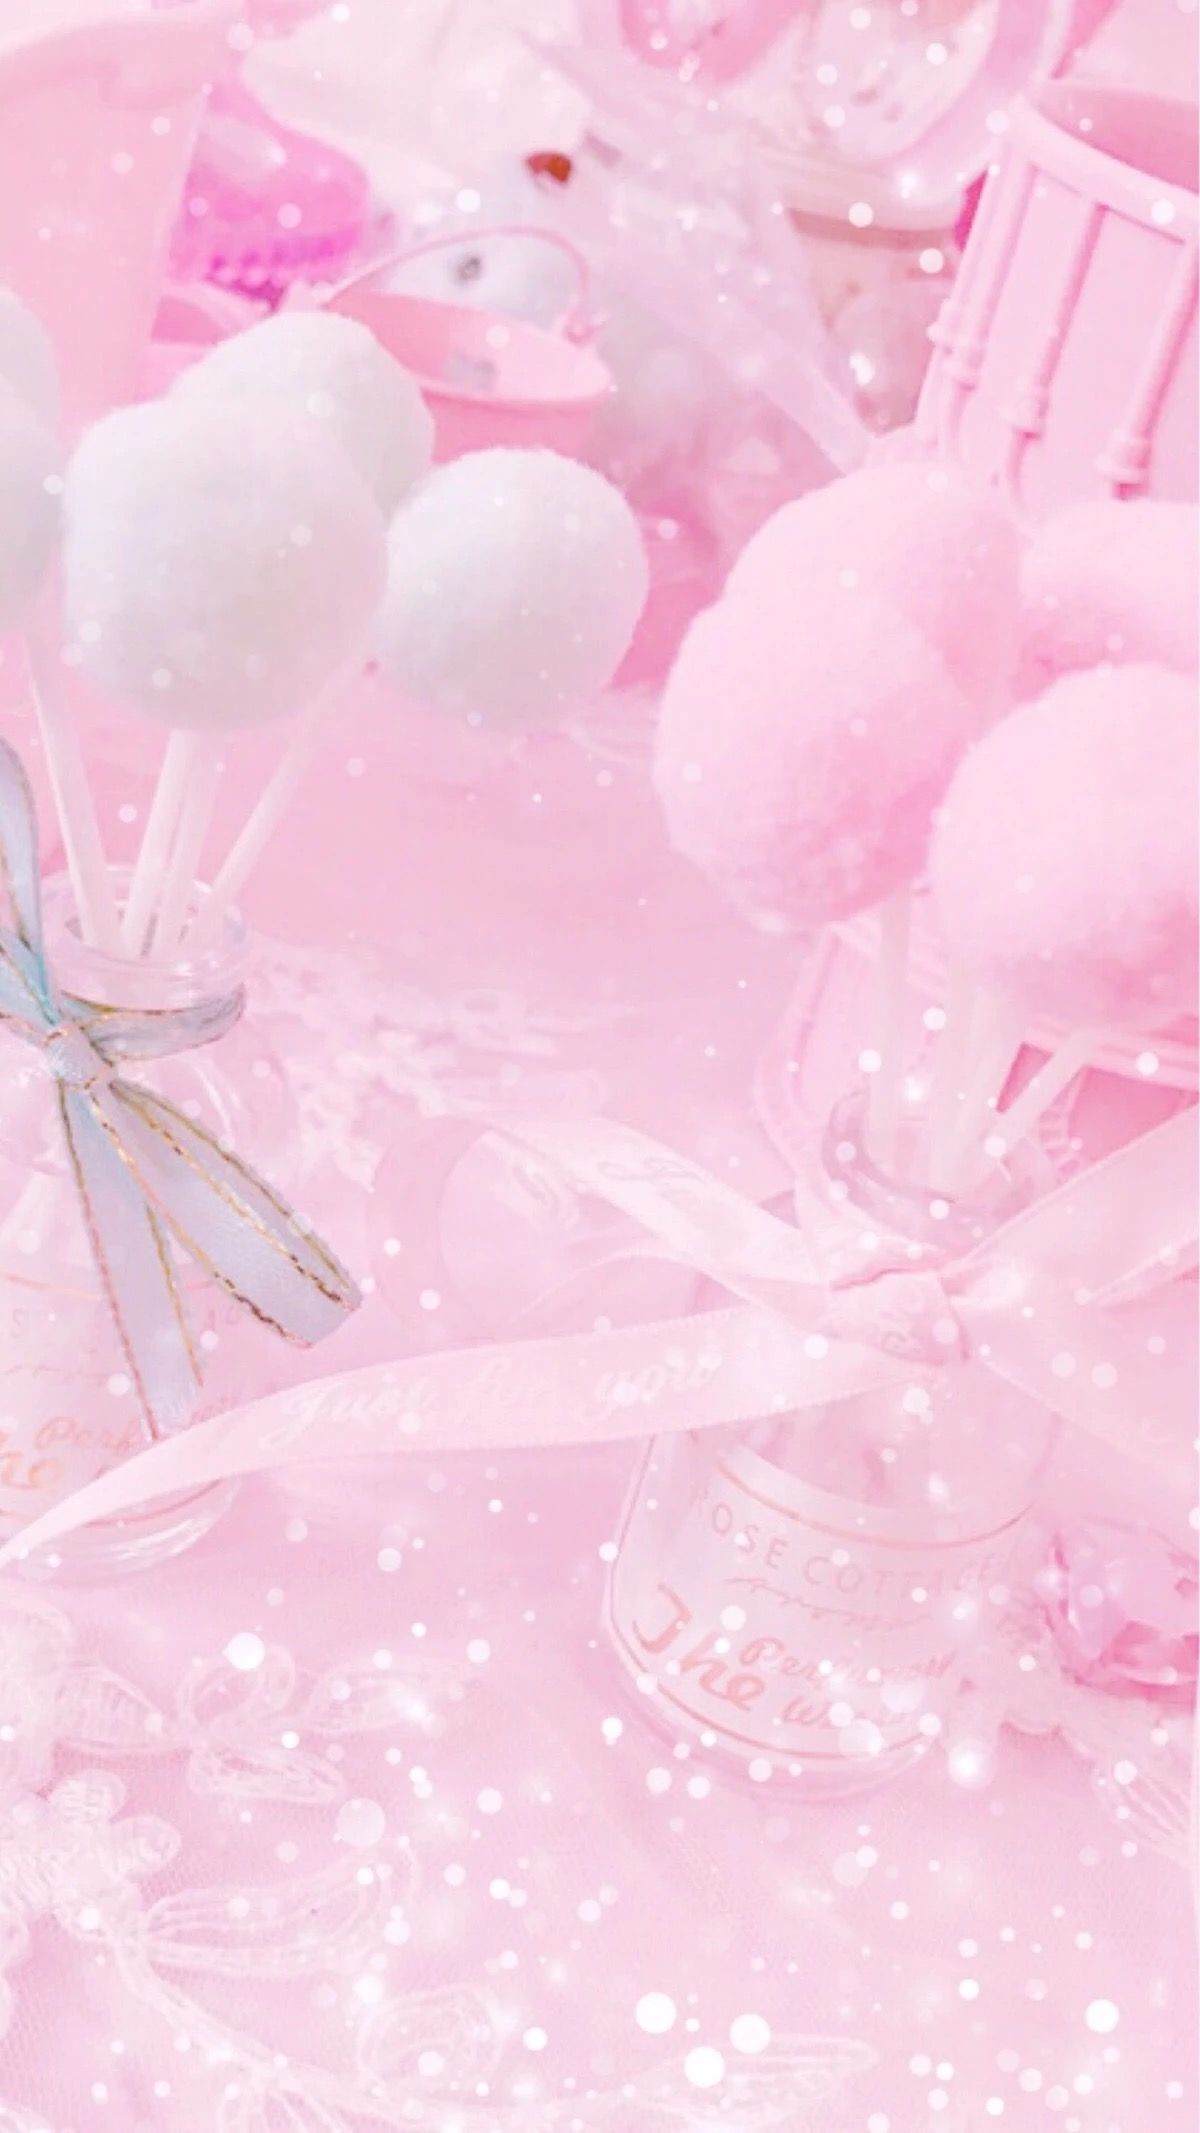 A picture of some candy in pink containers - Light pink, soft pink, cute pink, candy, bling